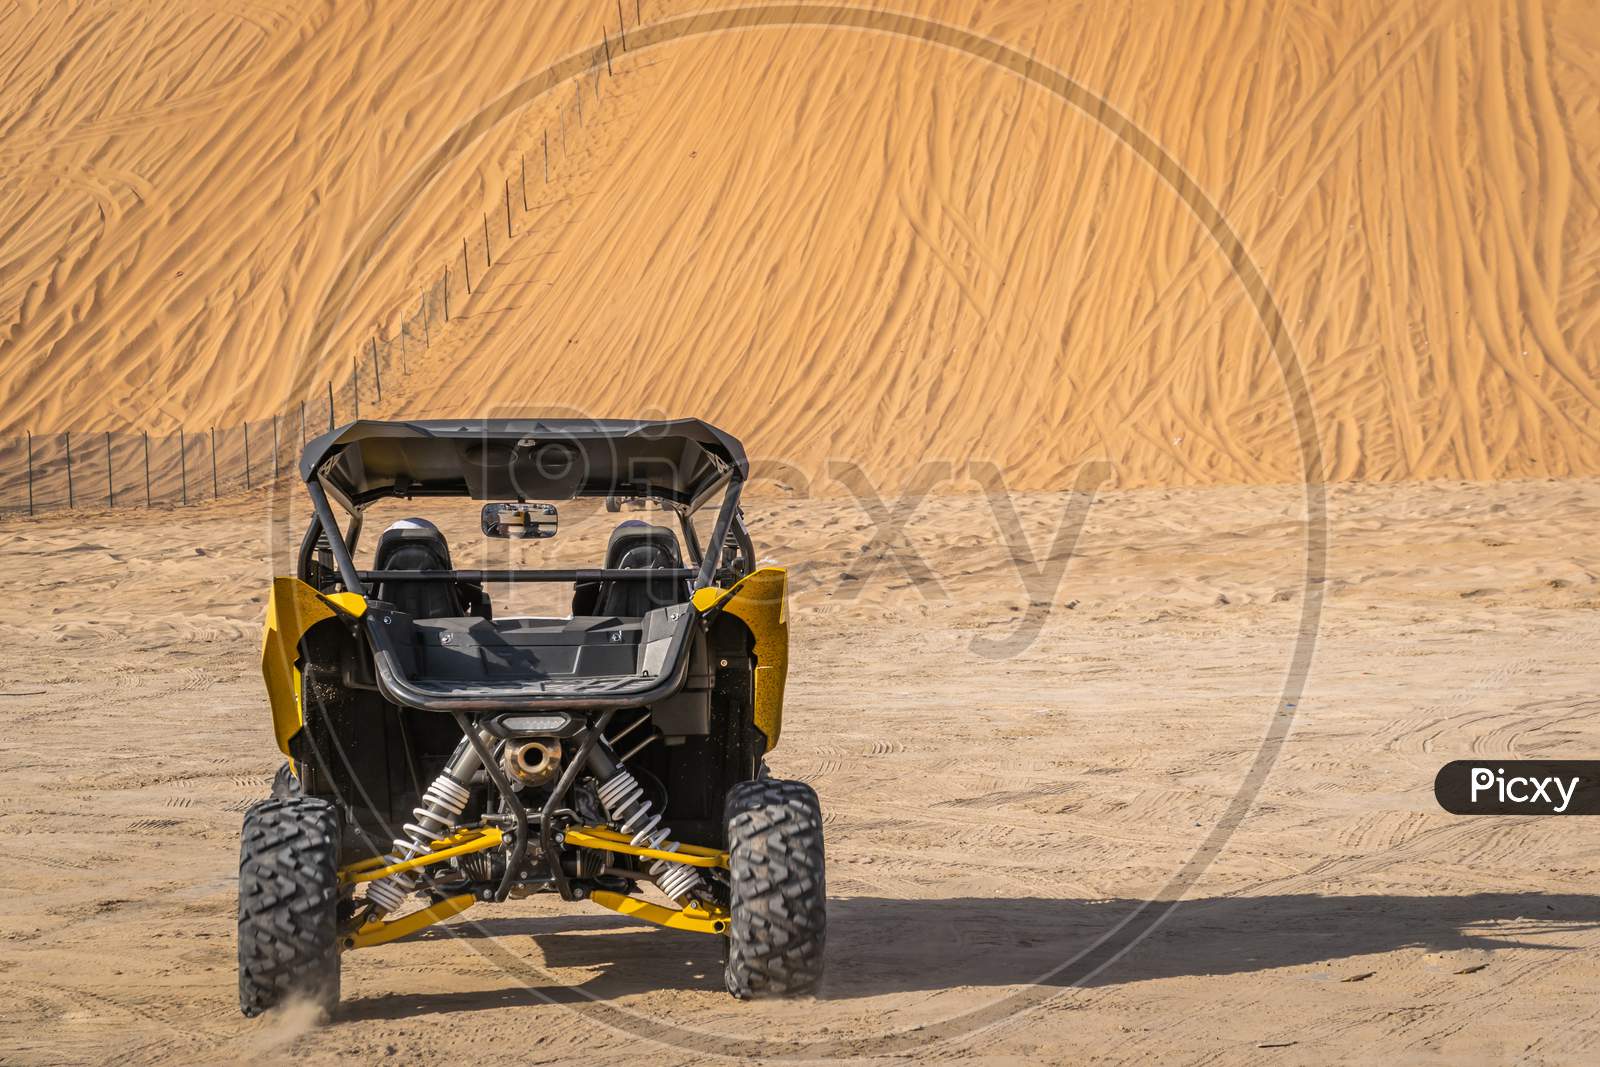 The Desert Patrol Vehicle Called Called The Fast Attack Vehicle Ready For Racing In Liwa Desert, Abu Dhabi,